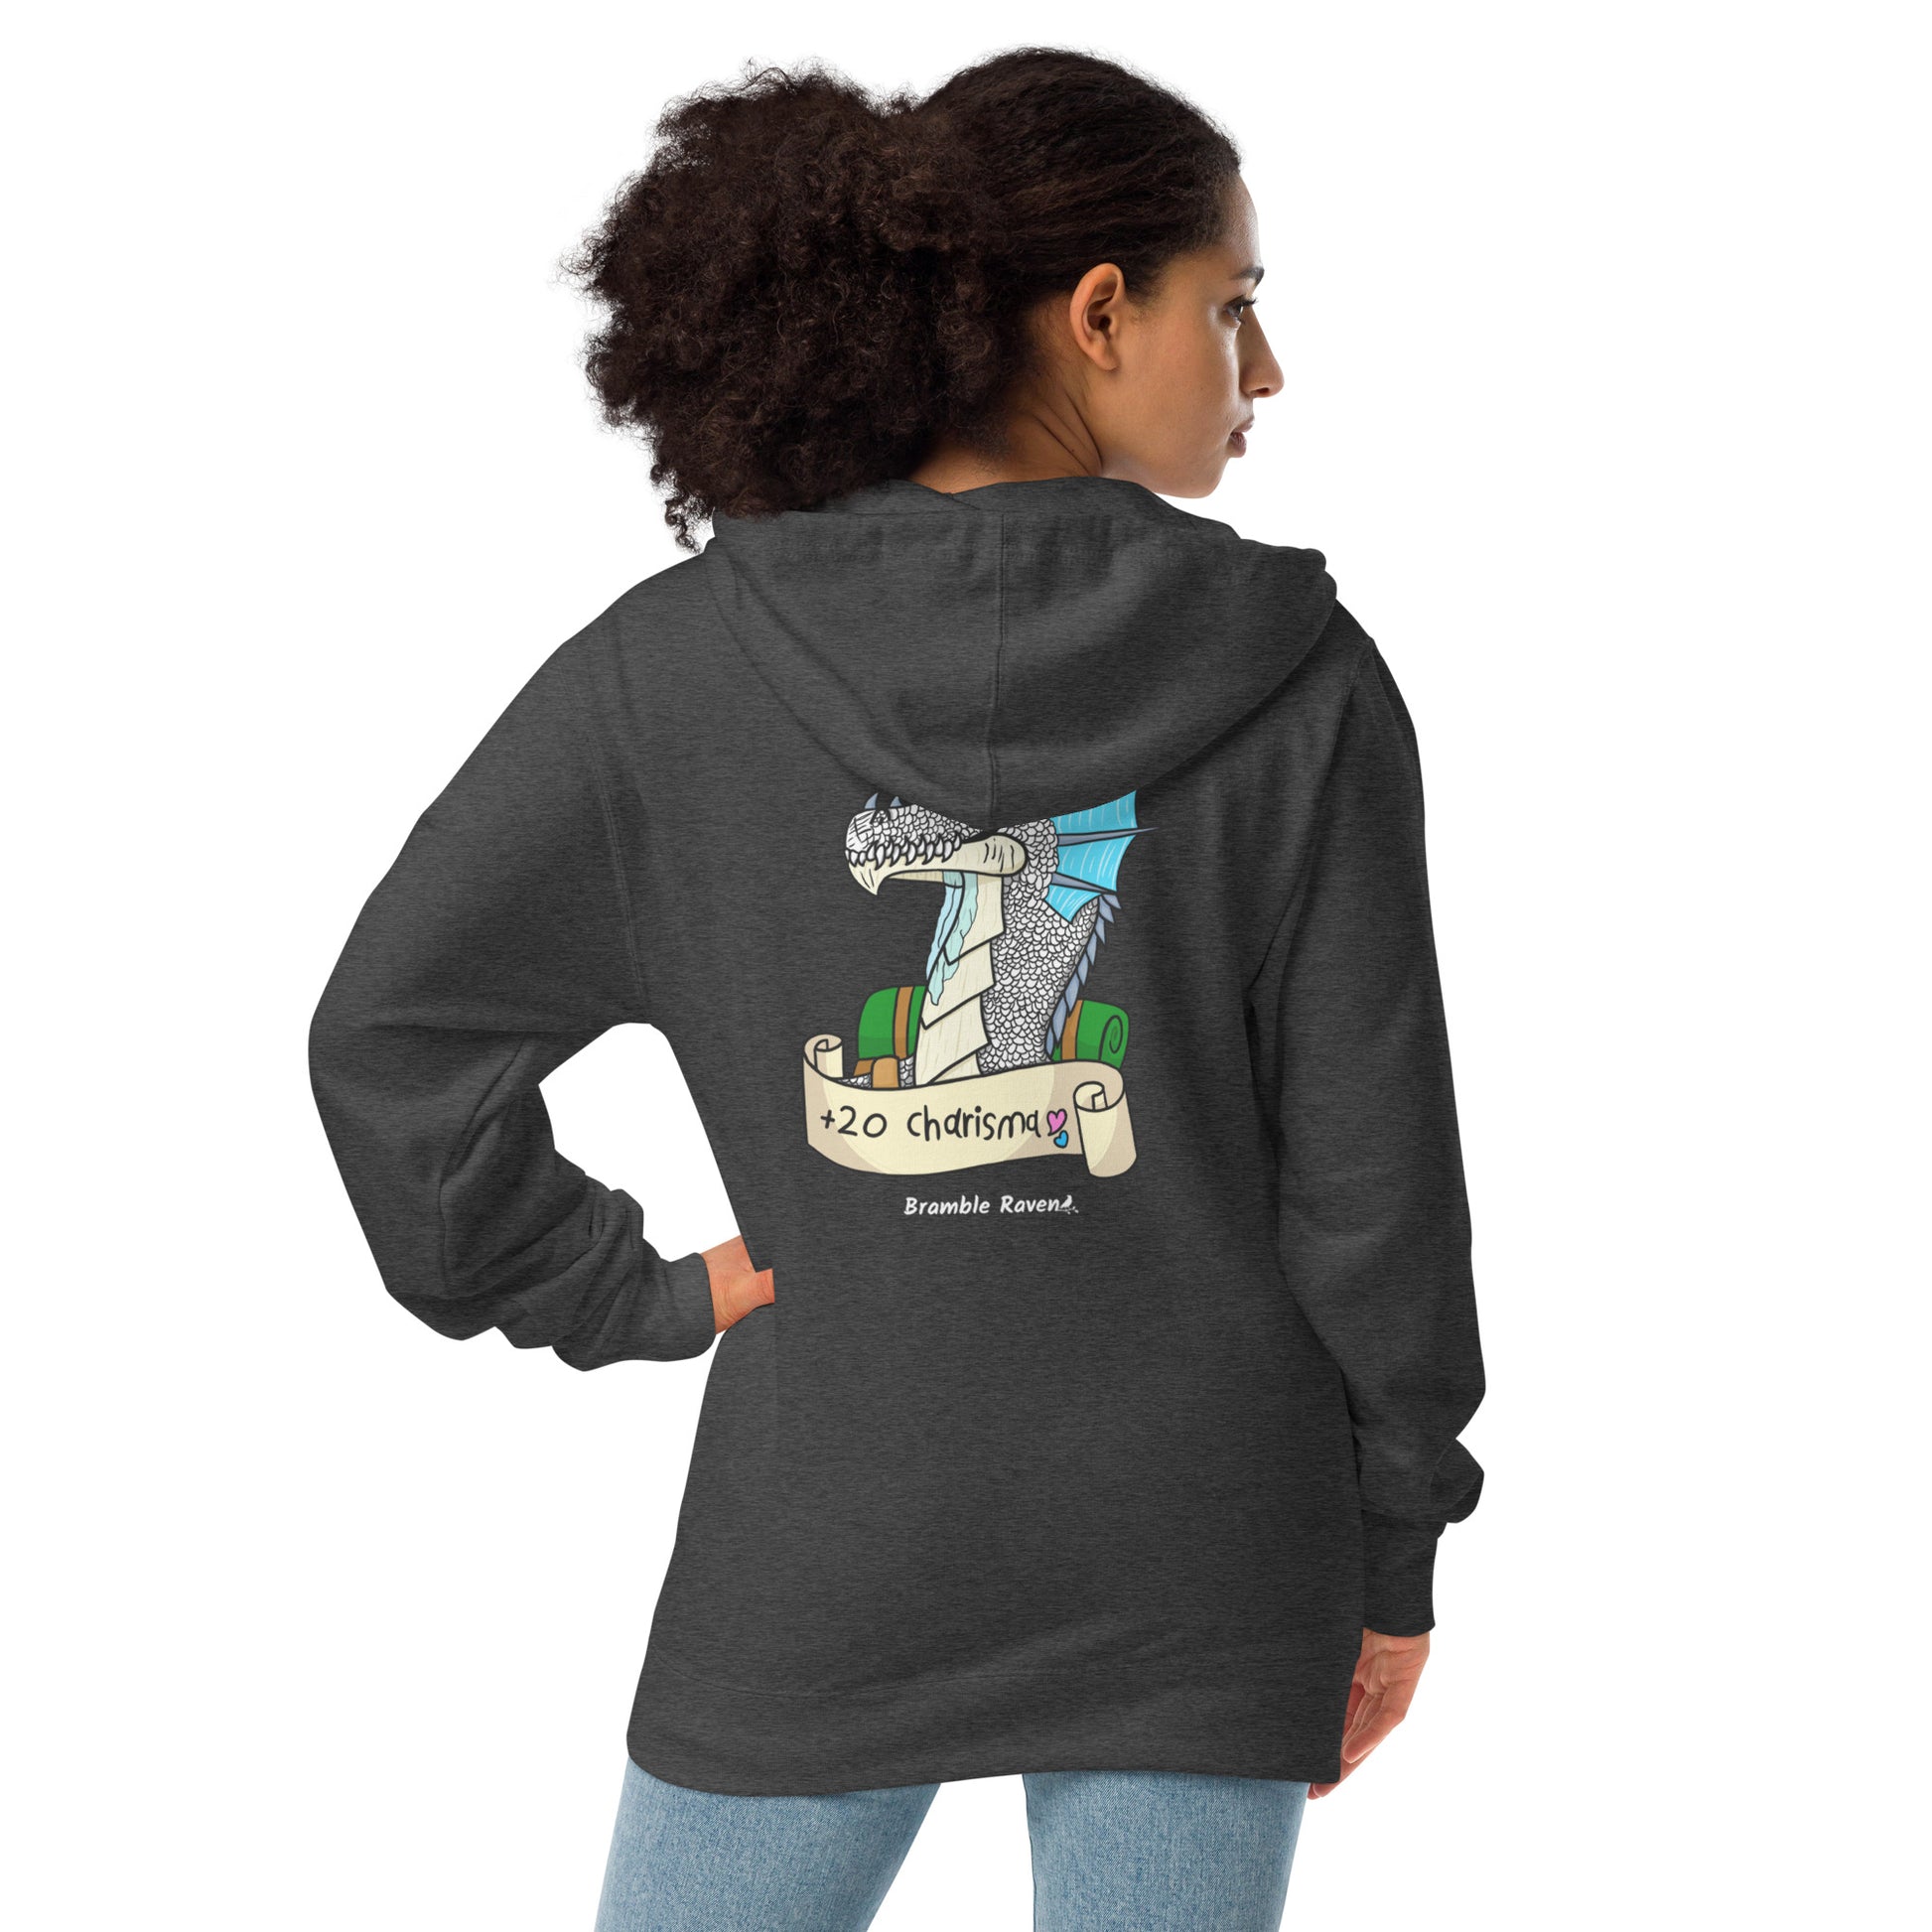 Original Bicycle the Bard dragon +20 Charisma design. On unisex fleece zip up hoodie. Charcoal Heather colored. Back design. Shown on female model.